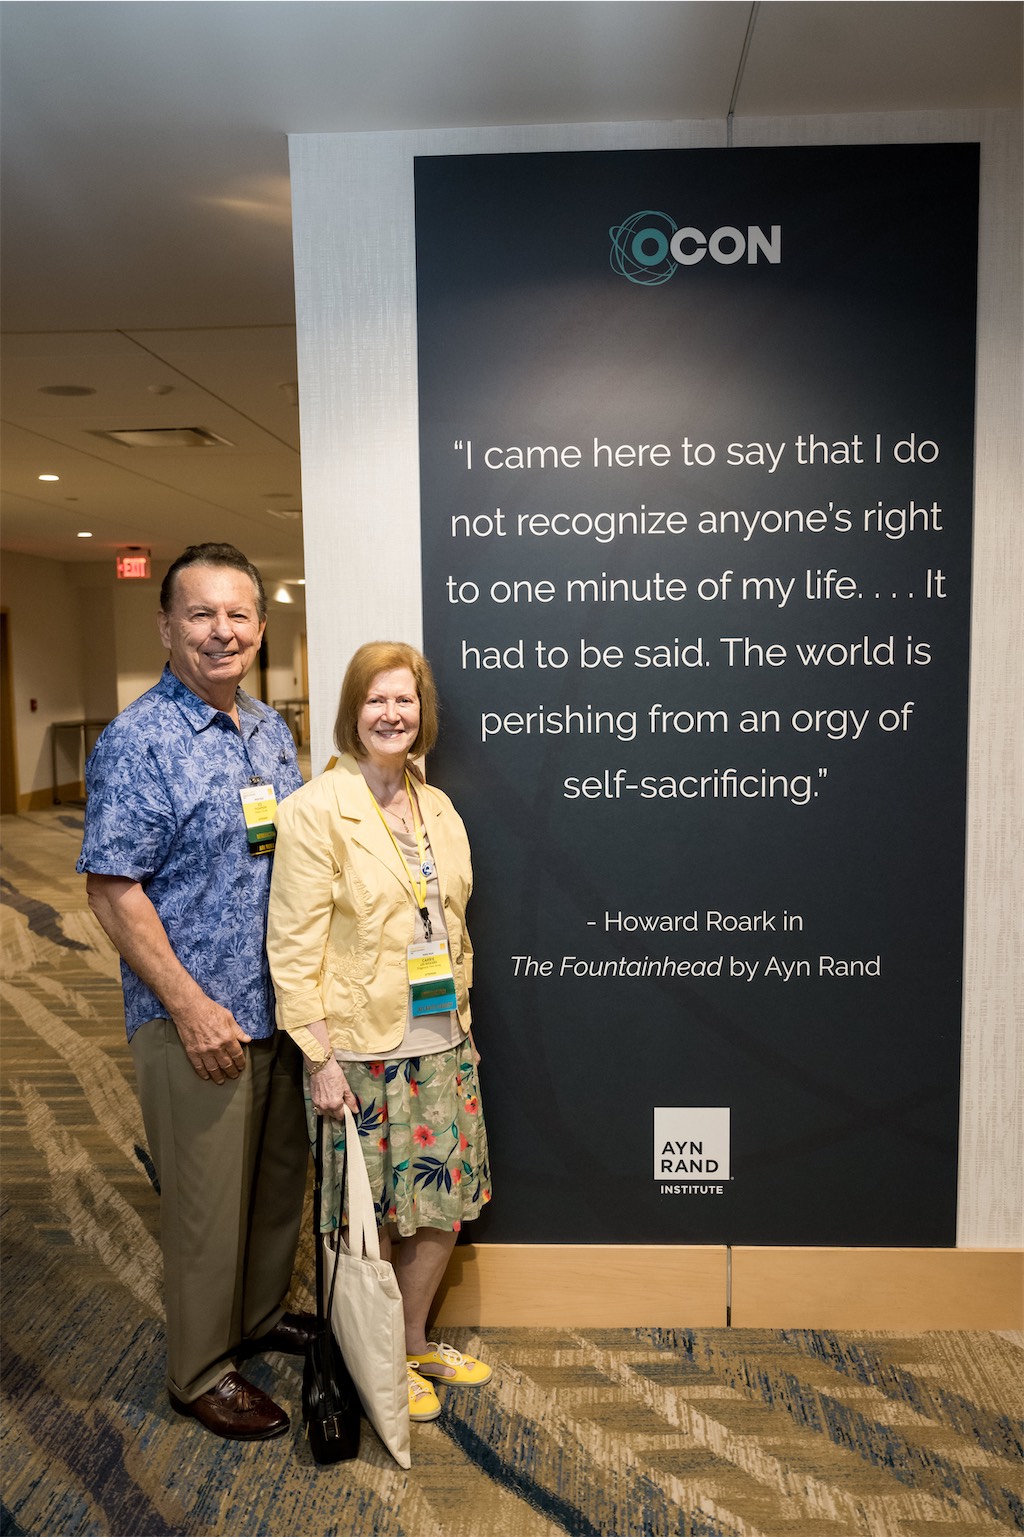 OCON attendees pose by quote from The Fountainhead